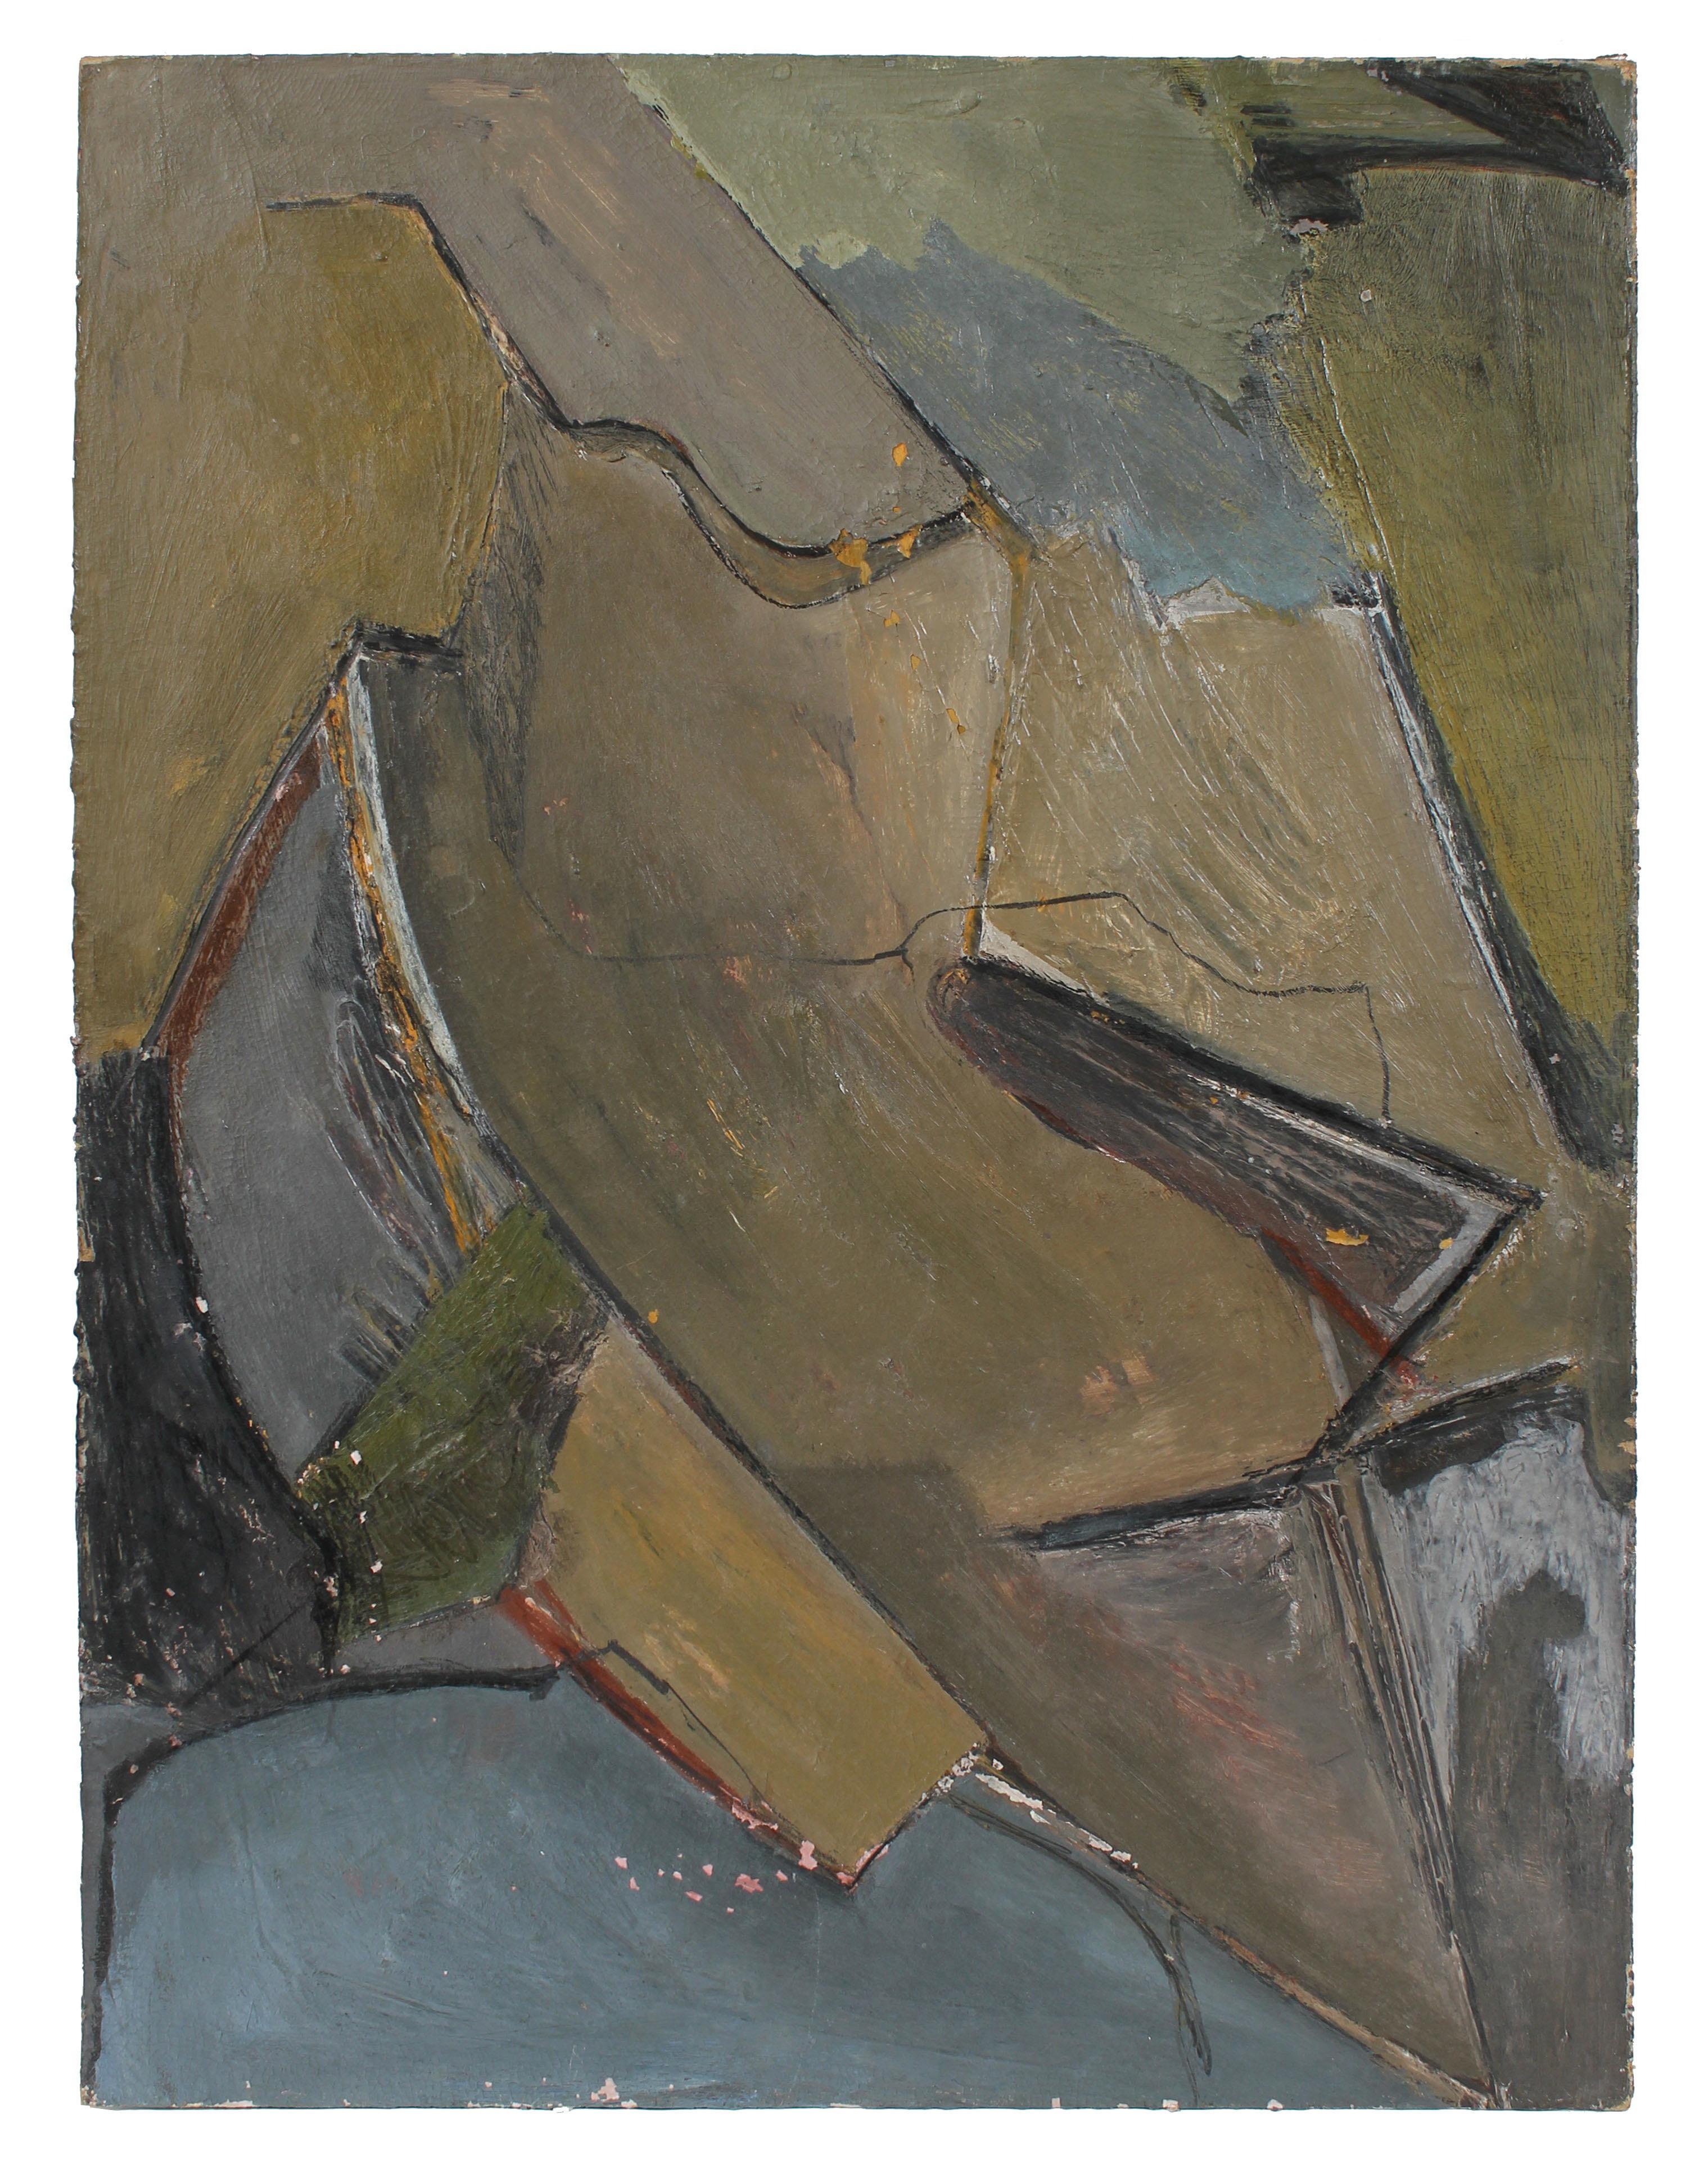 Jack Freeman Abstract Painting – Abstract Expressionist Painting in Cool Tones, Circa 1960s